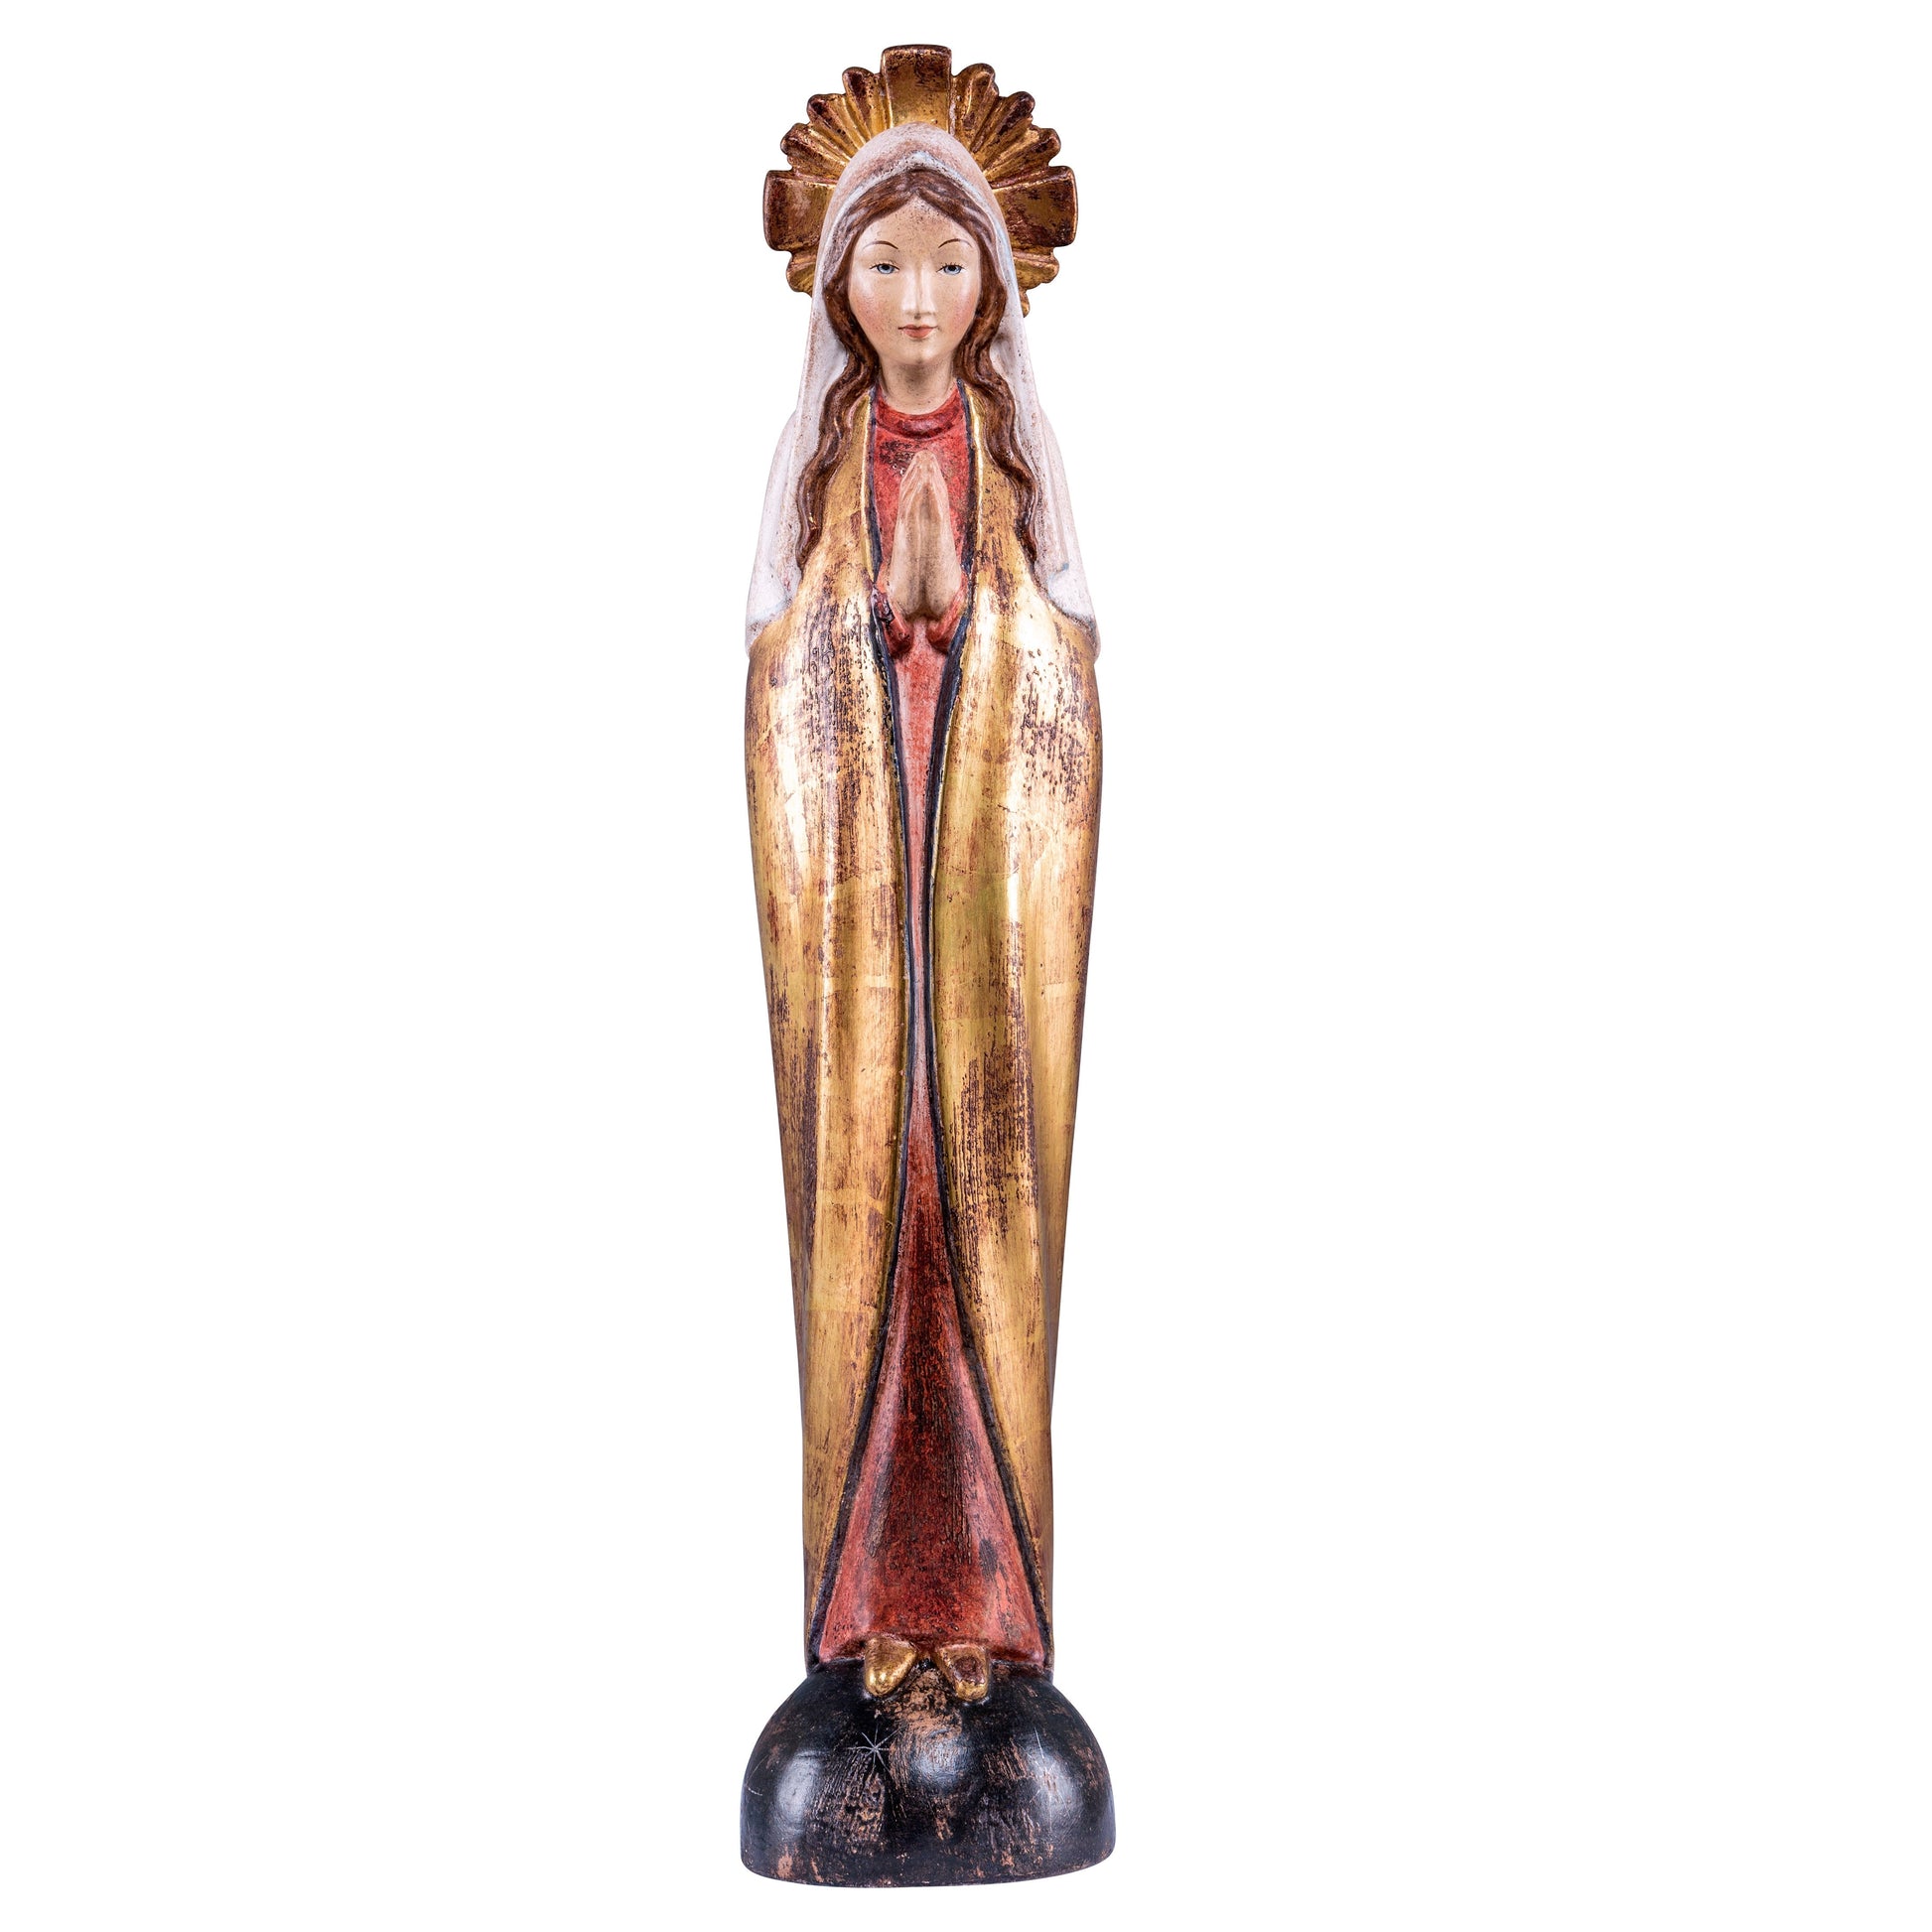 MONDO CATTOLICO Golden / 40 cm (15.7 in) Wooden statue of Madonna stylized